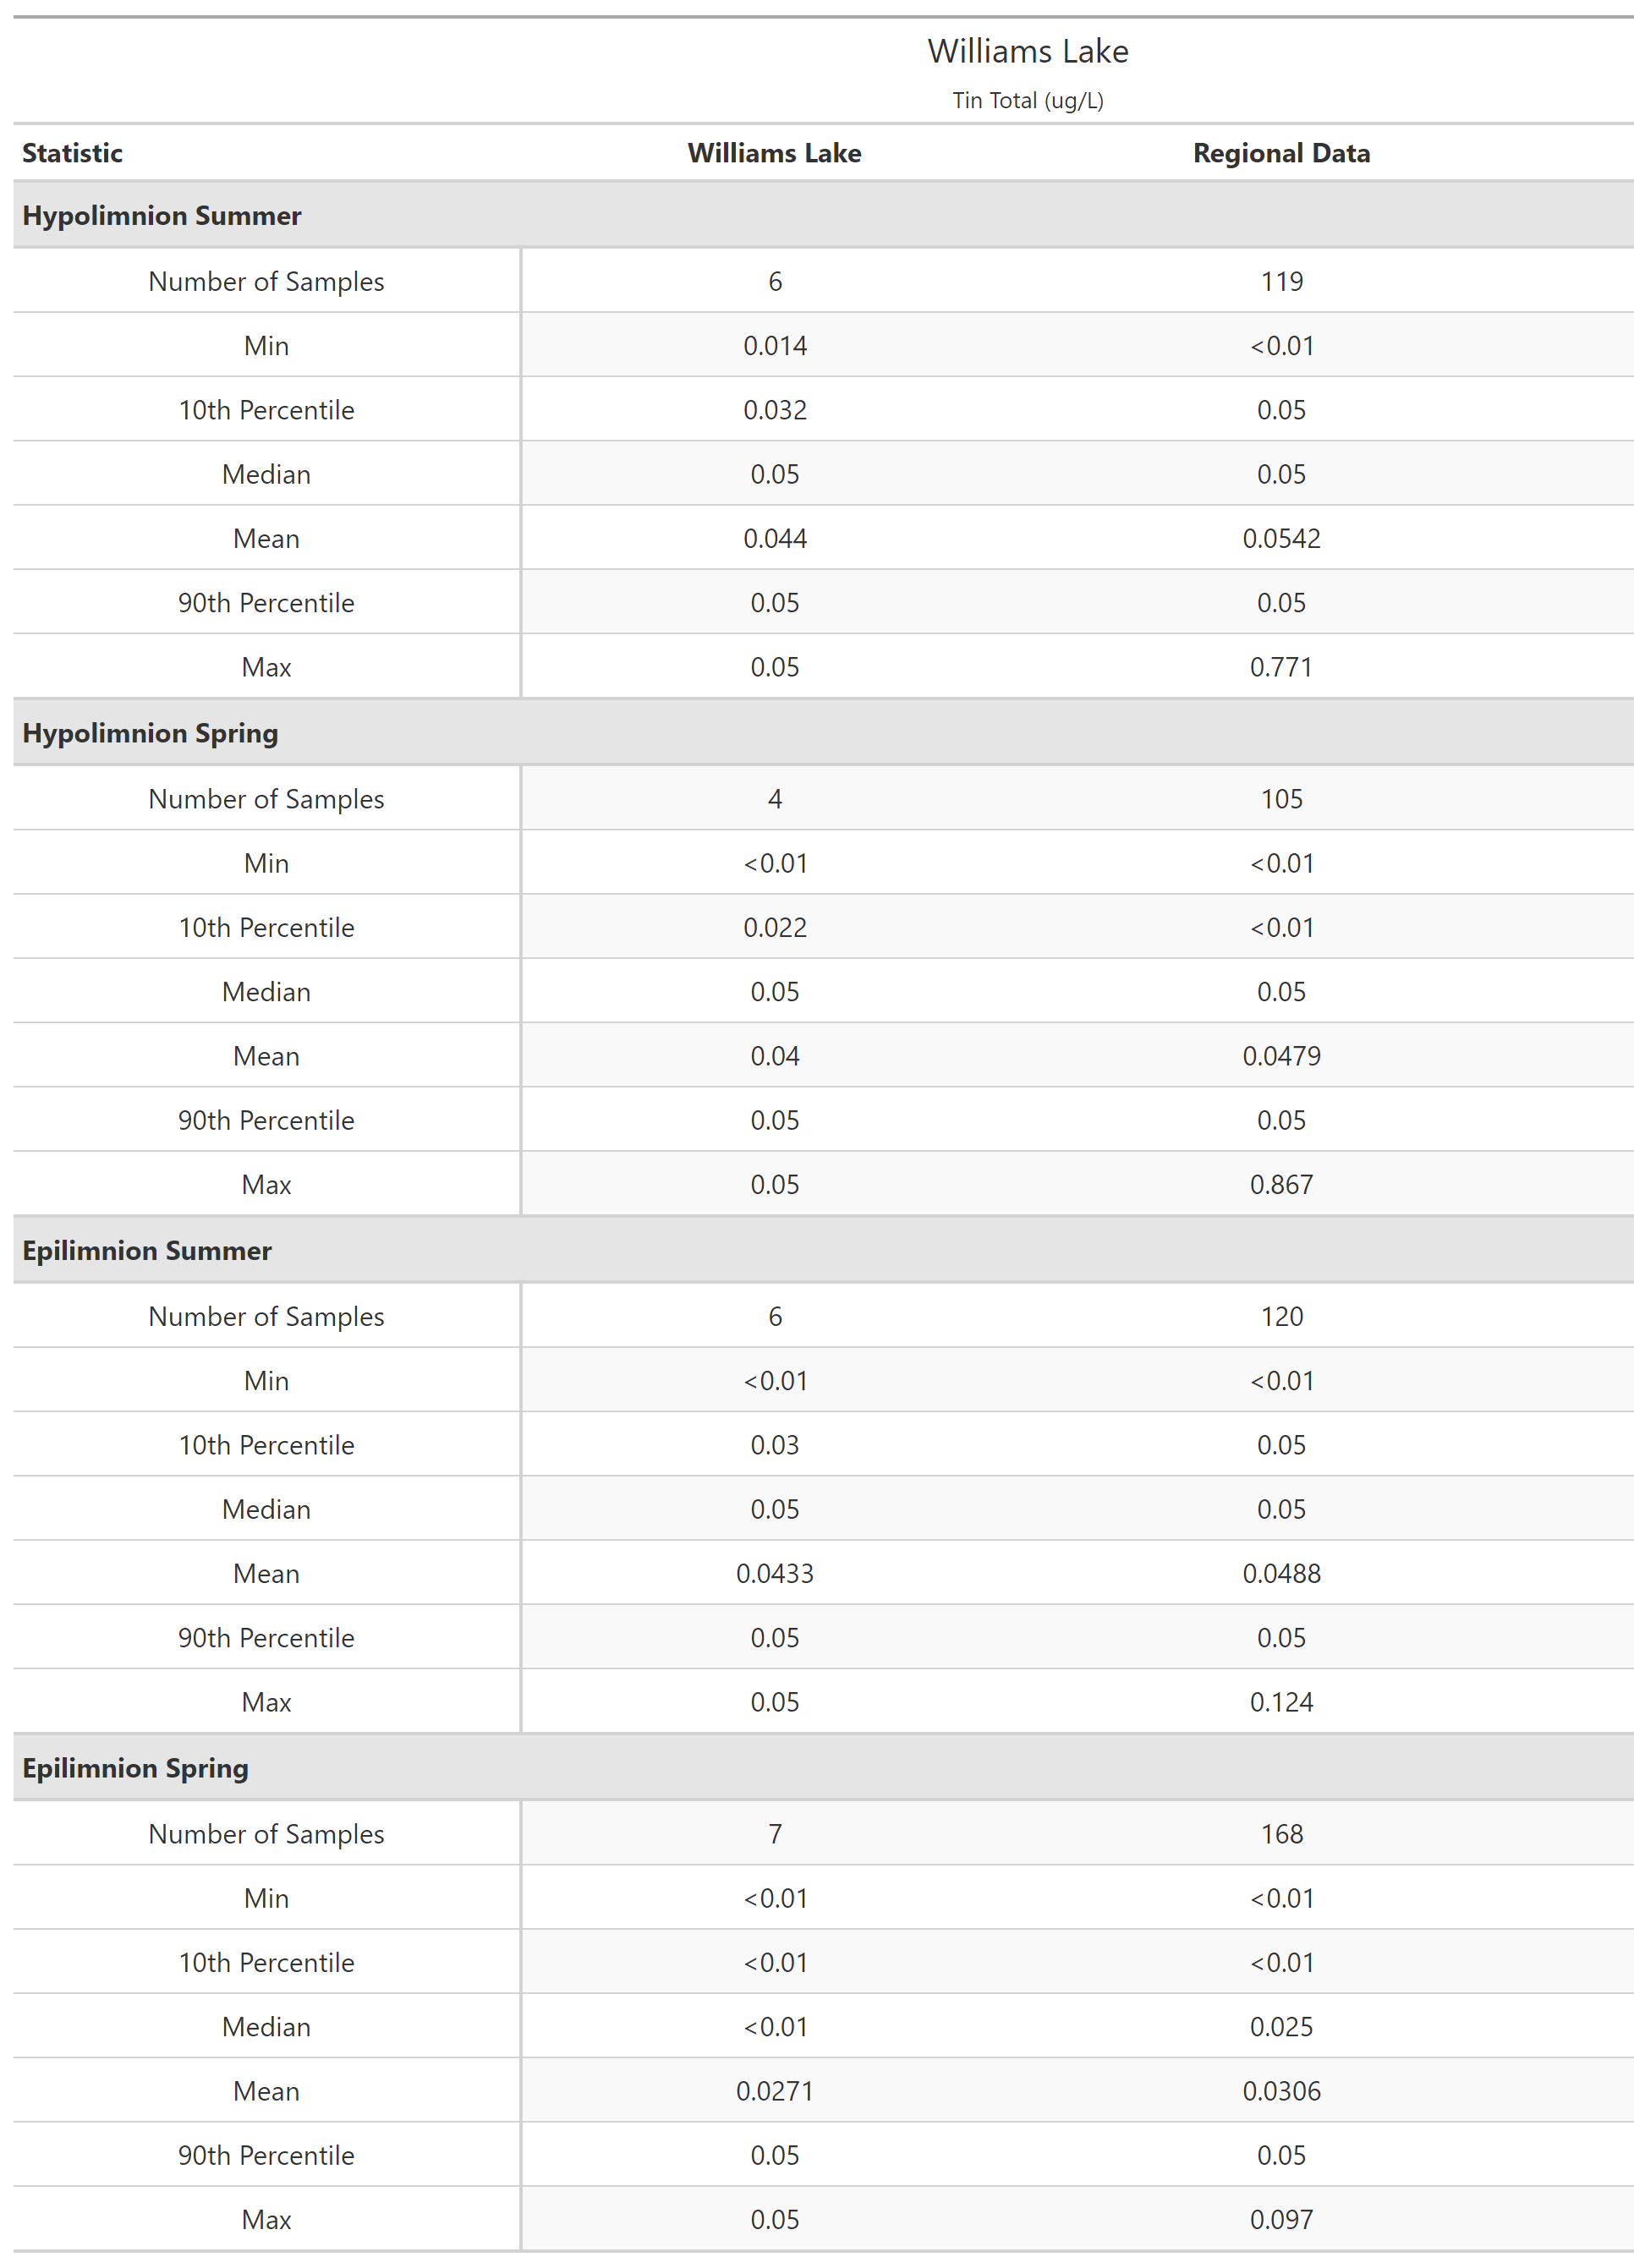 A table of summary statistics for Tin Total with comparison to regional data